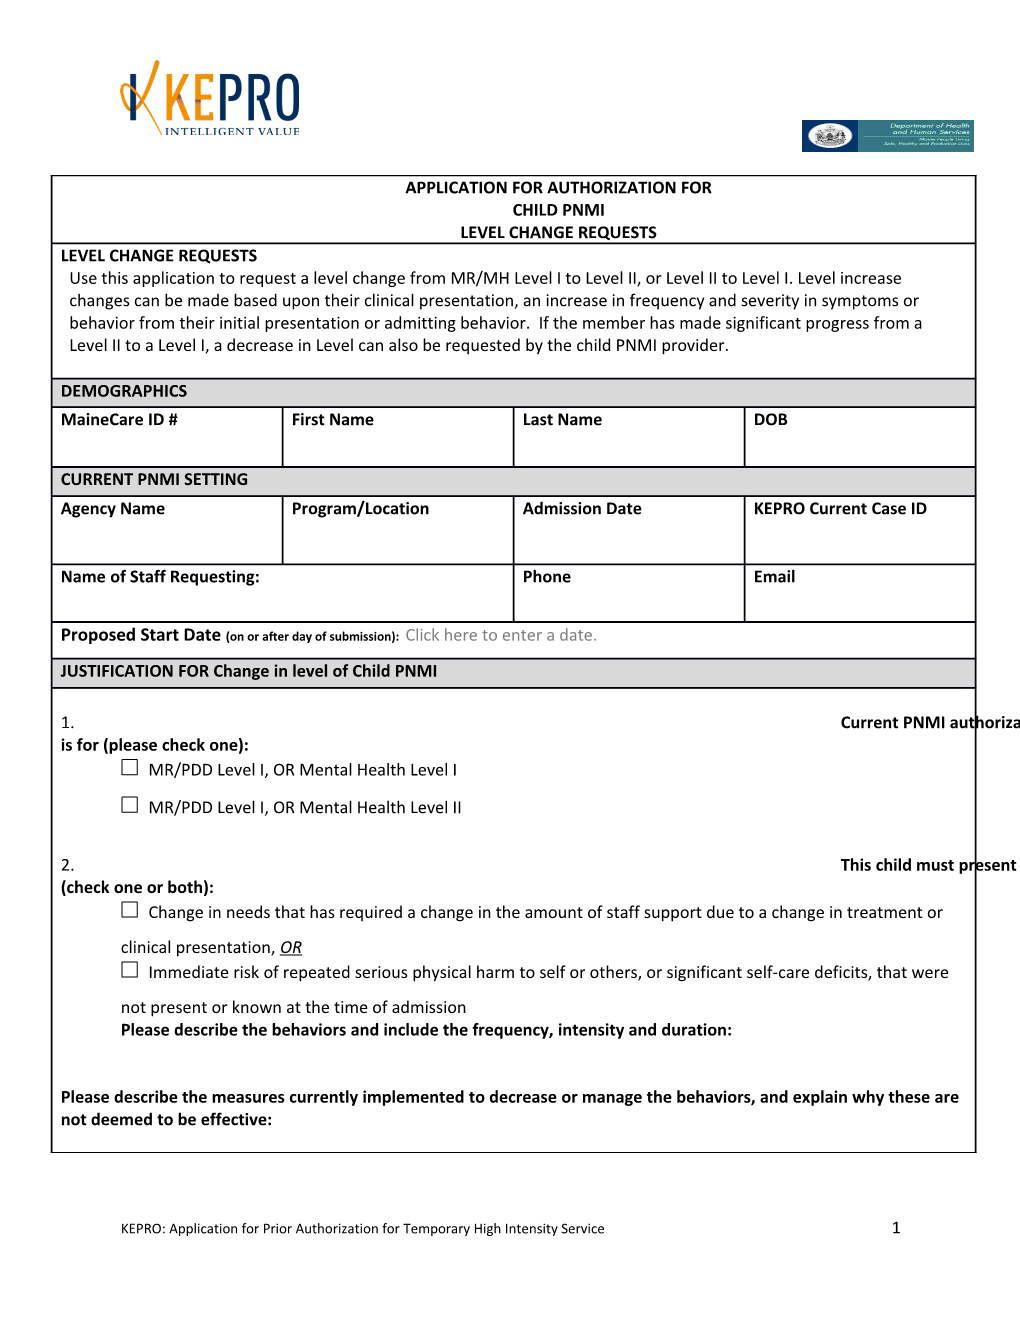 Application for Authorization for Child Pnmi Level Change Requests Level Change Requests